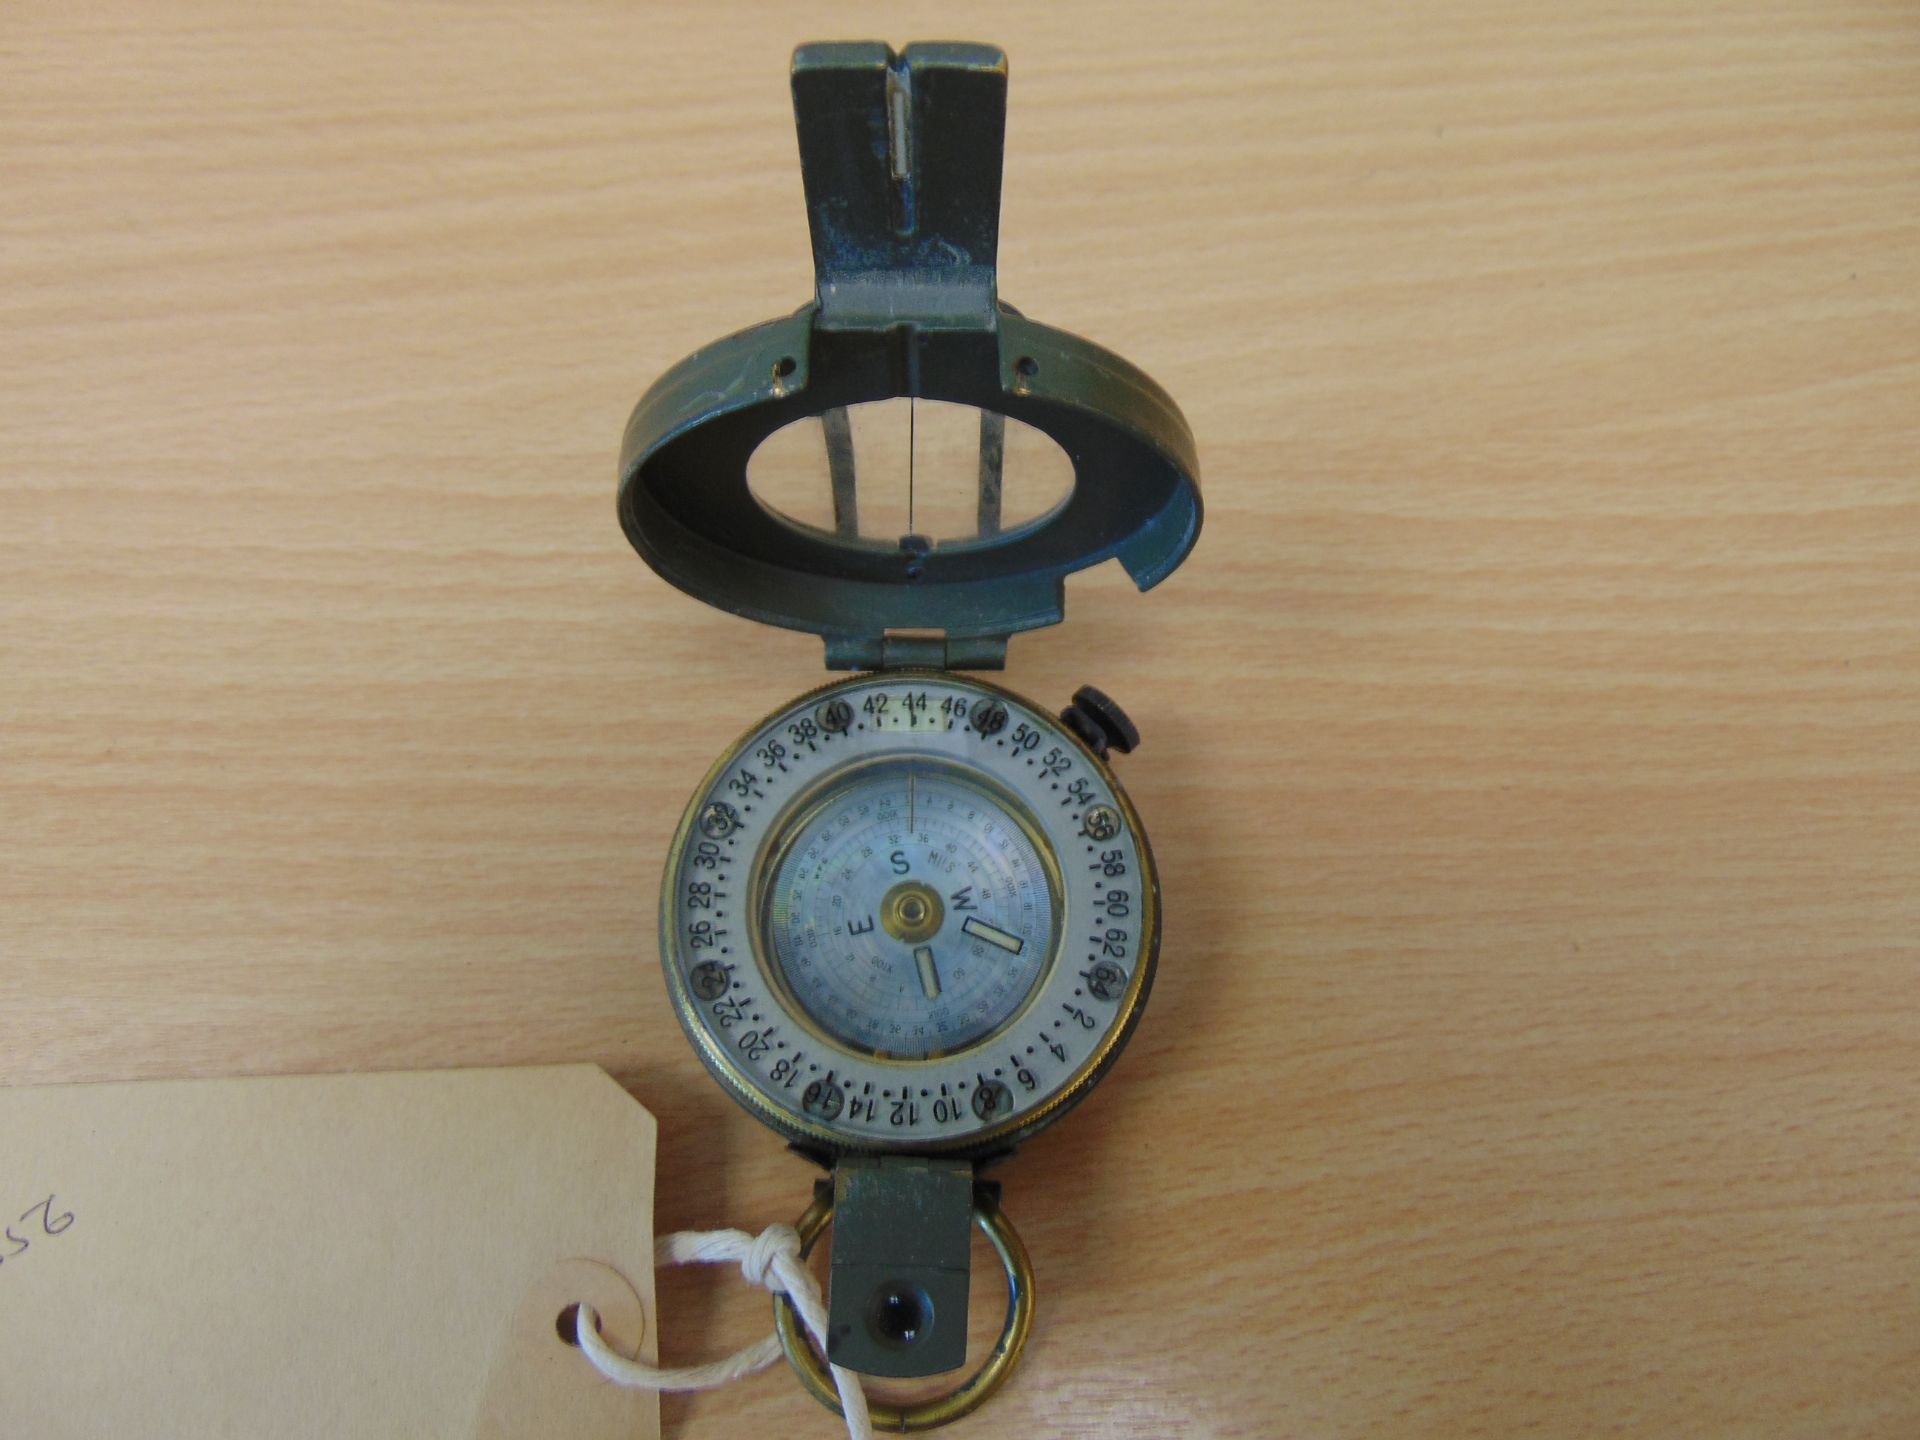 Stanley London British Army Brass Prismatic Compass Nato Marks in Mils - Image 2 of 4